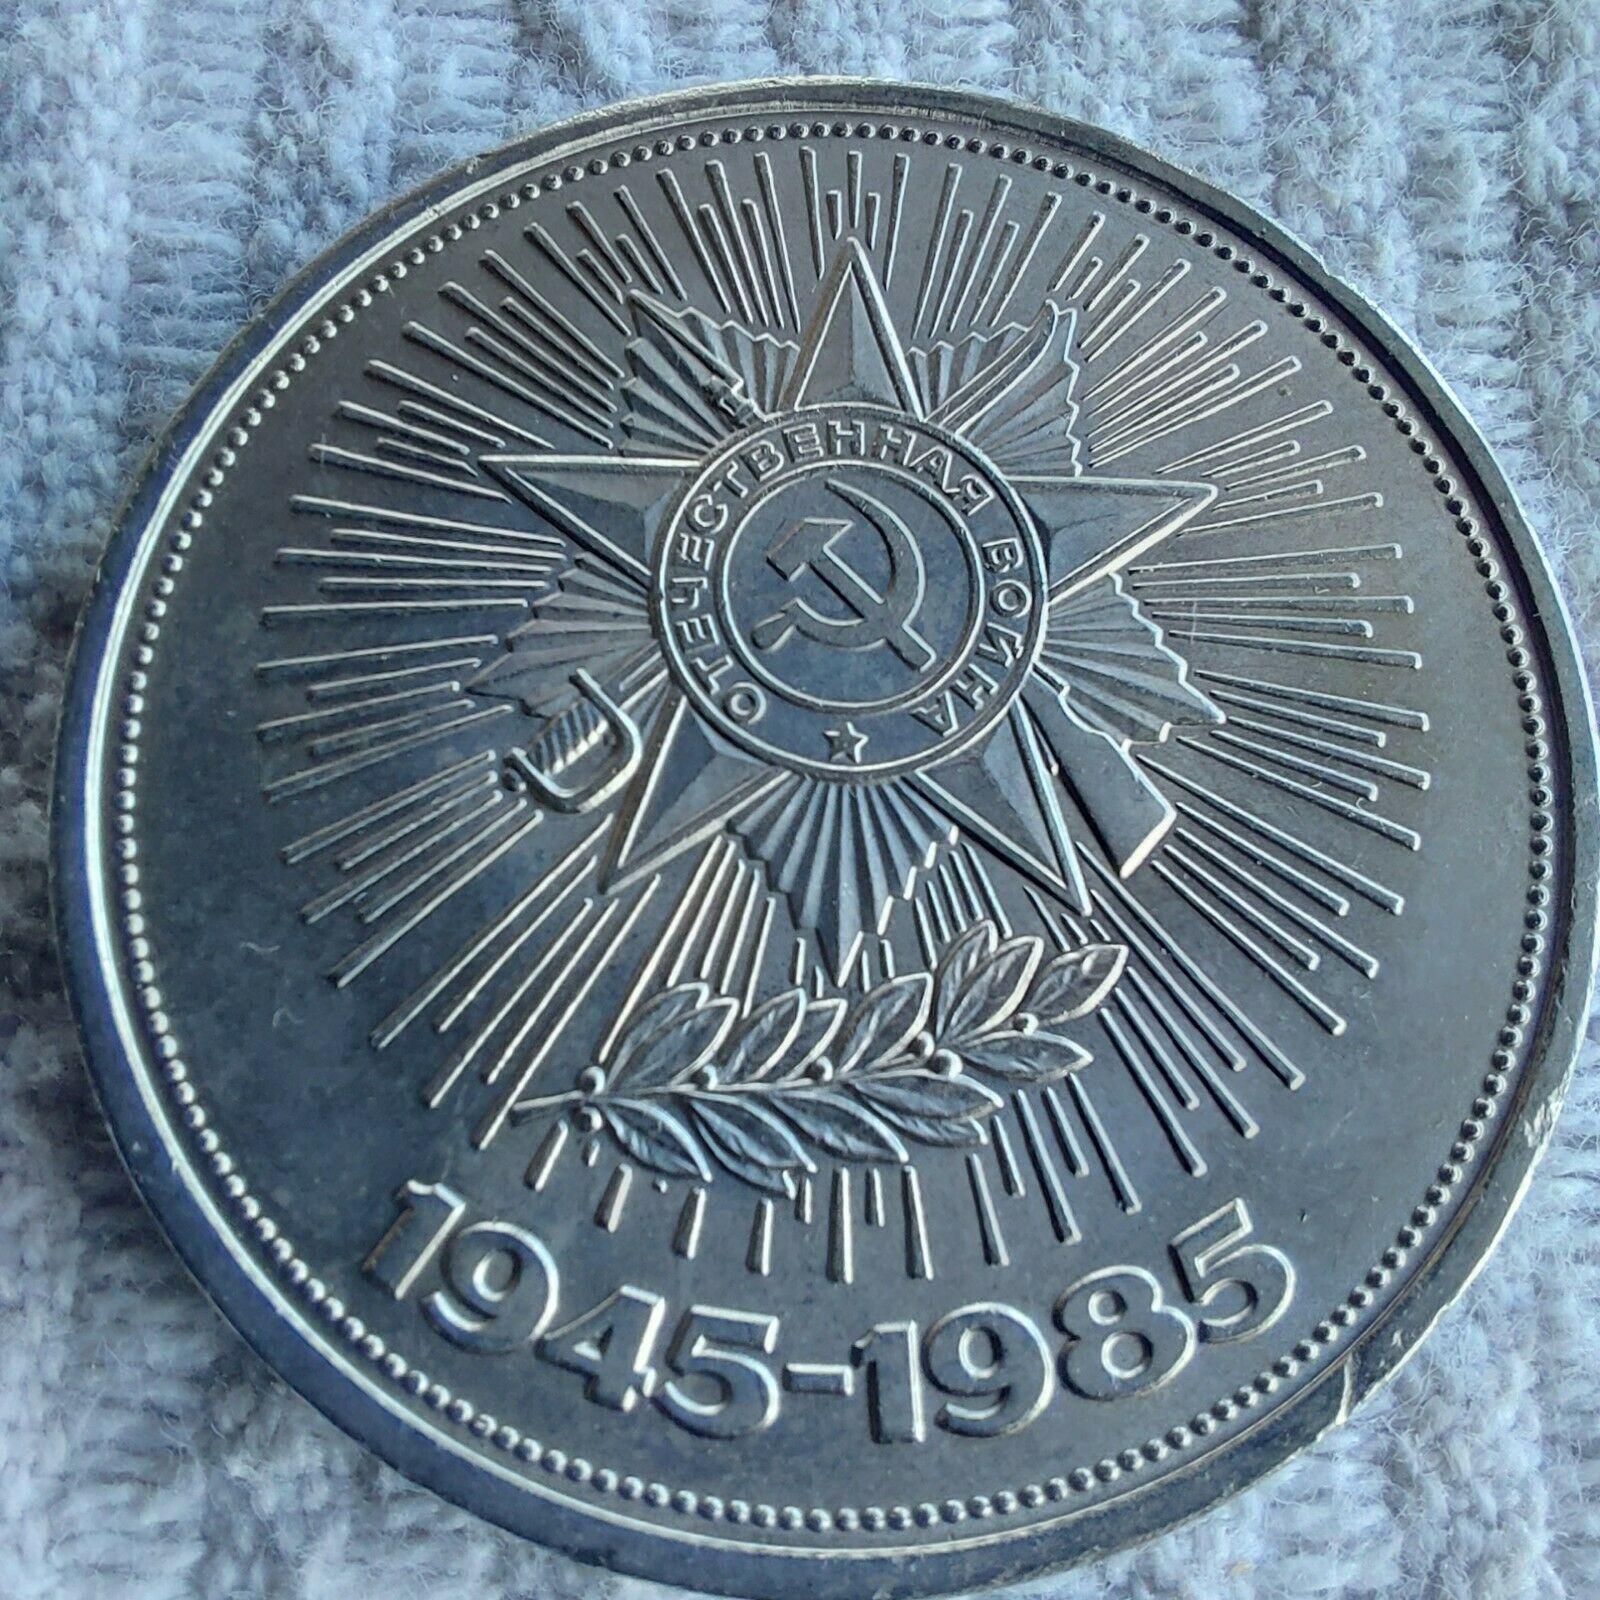 Ussr Coin 1 Ruble 1985 40th Anniversary Of Victory